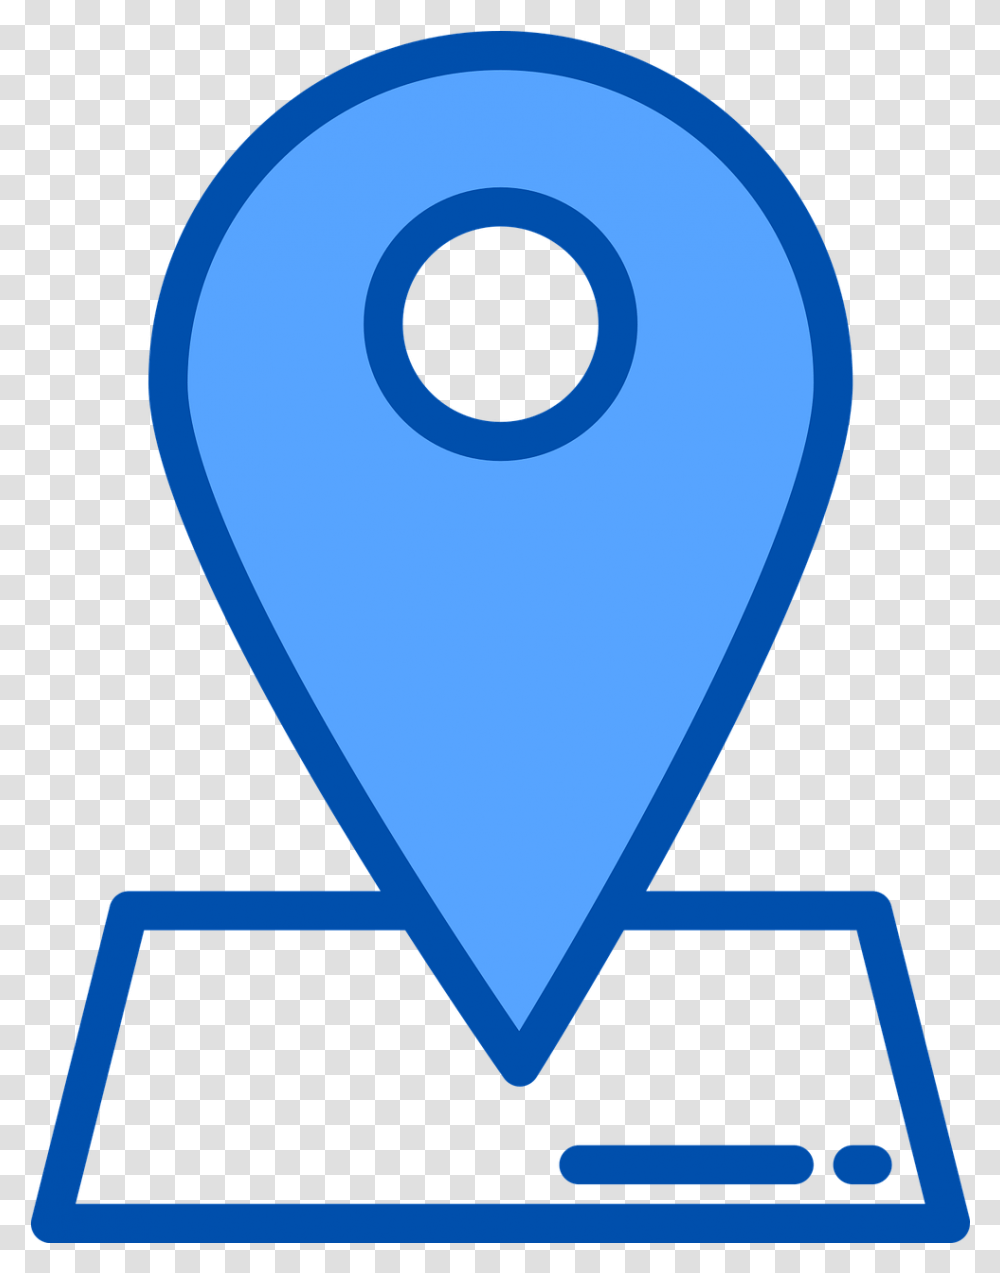 Navigation Pin Pointer Free Vector Graphic On Pixabay, Plectrum, Heart Transparent Png